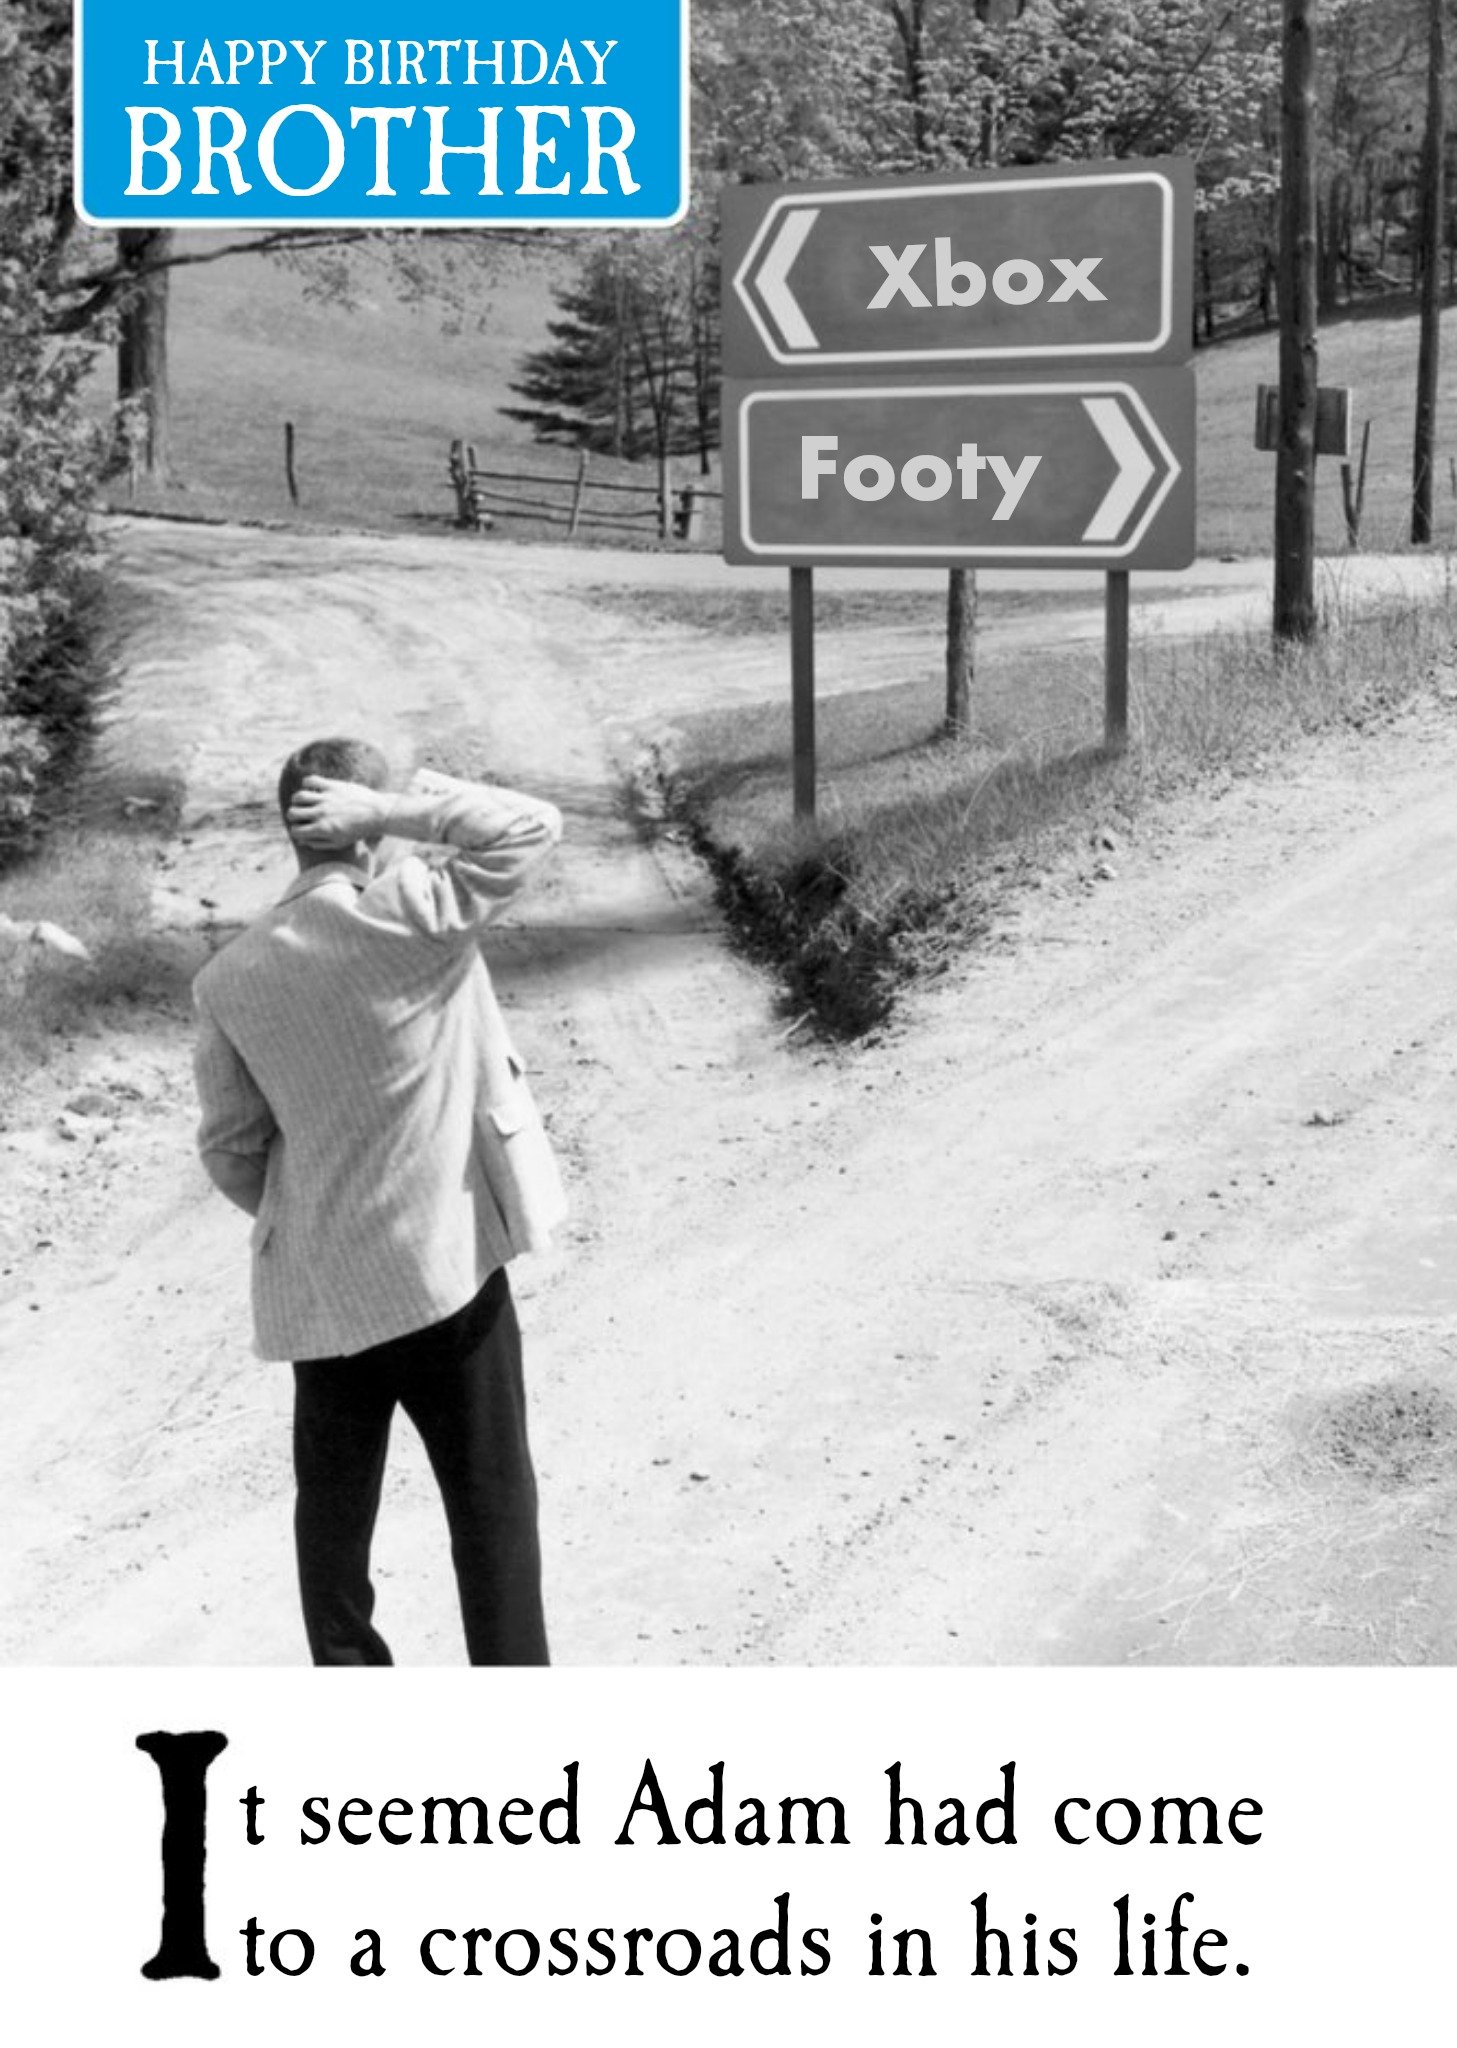 Reaching A Crossroads In His Life Xbox Or Footy Humour Brother Birthday Card Ecard